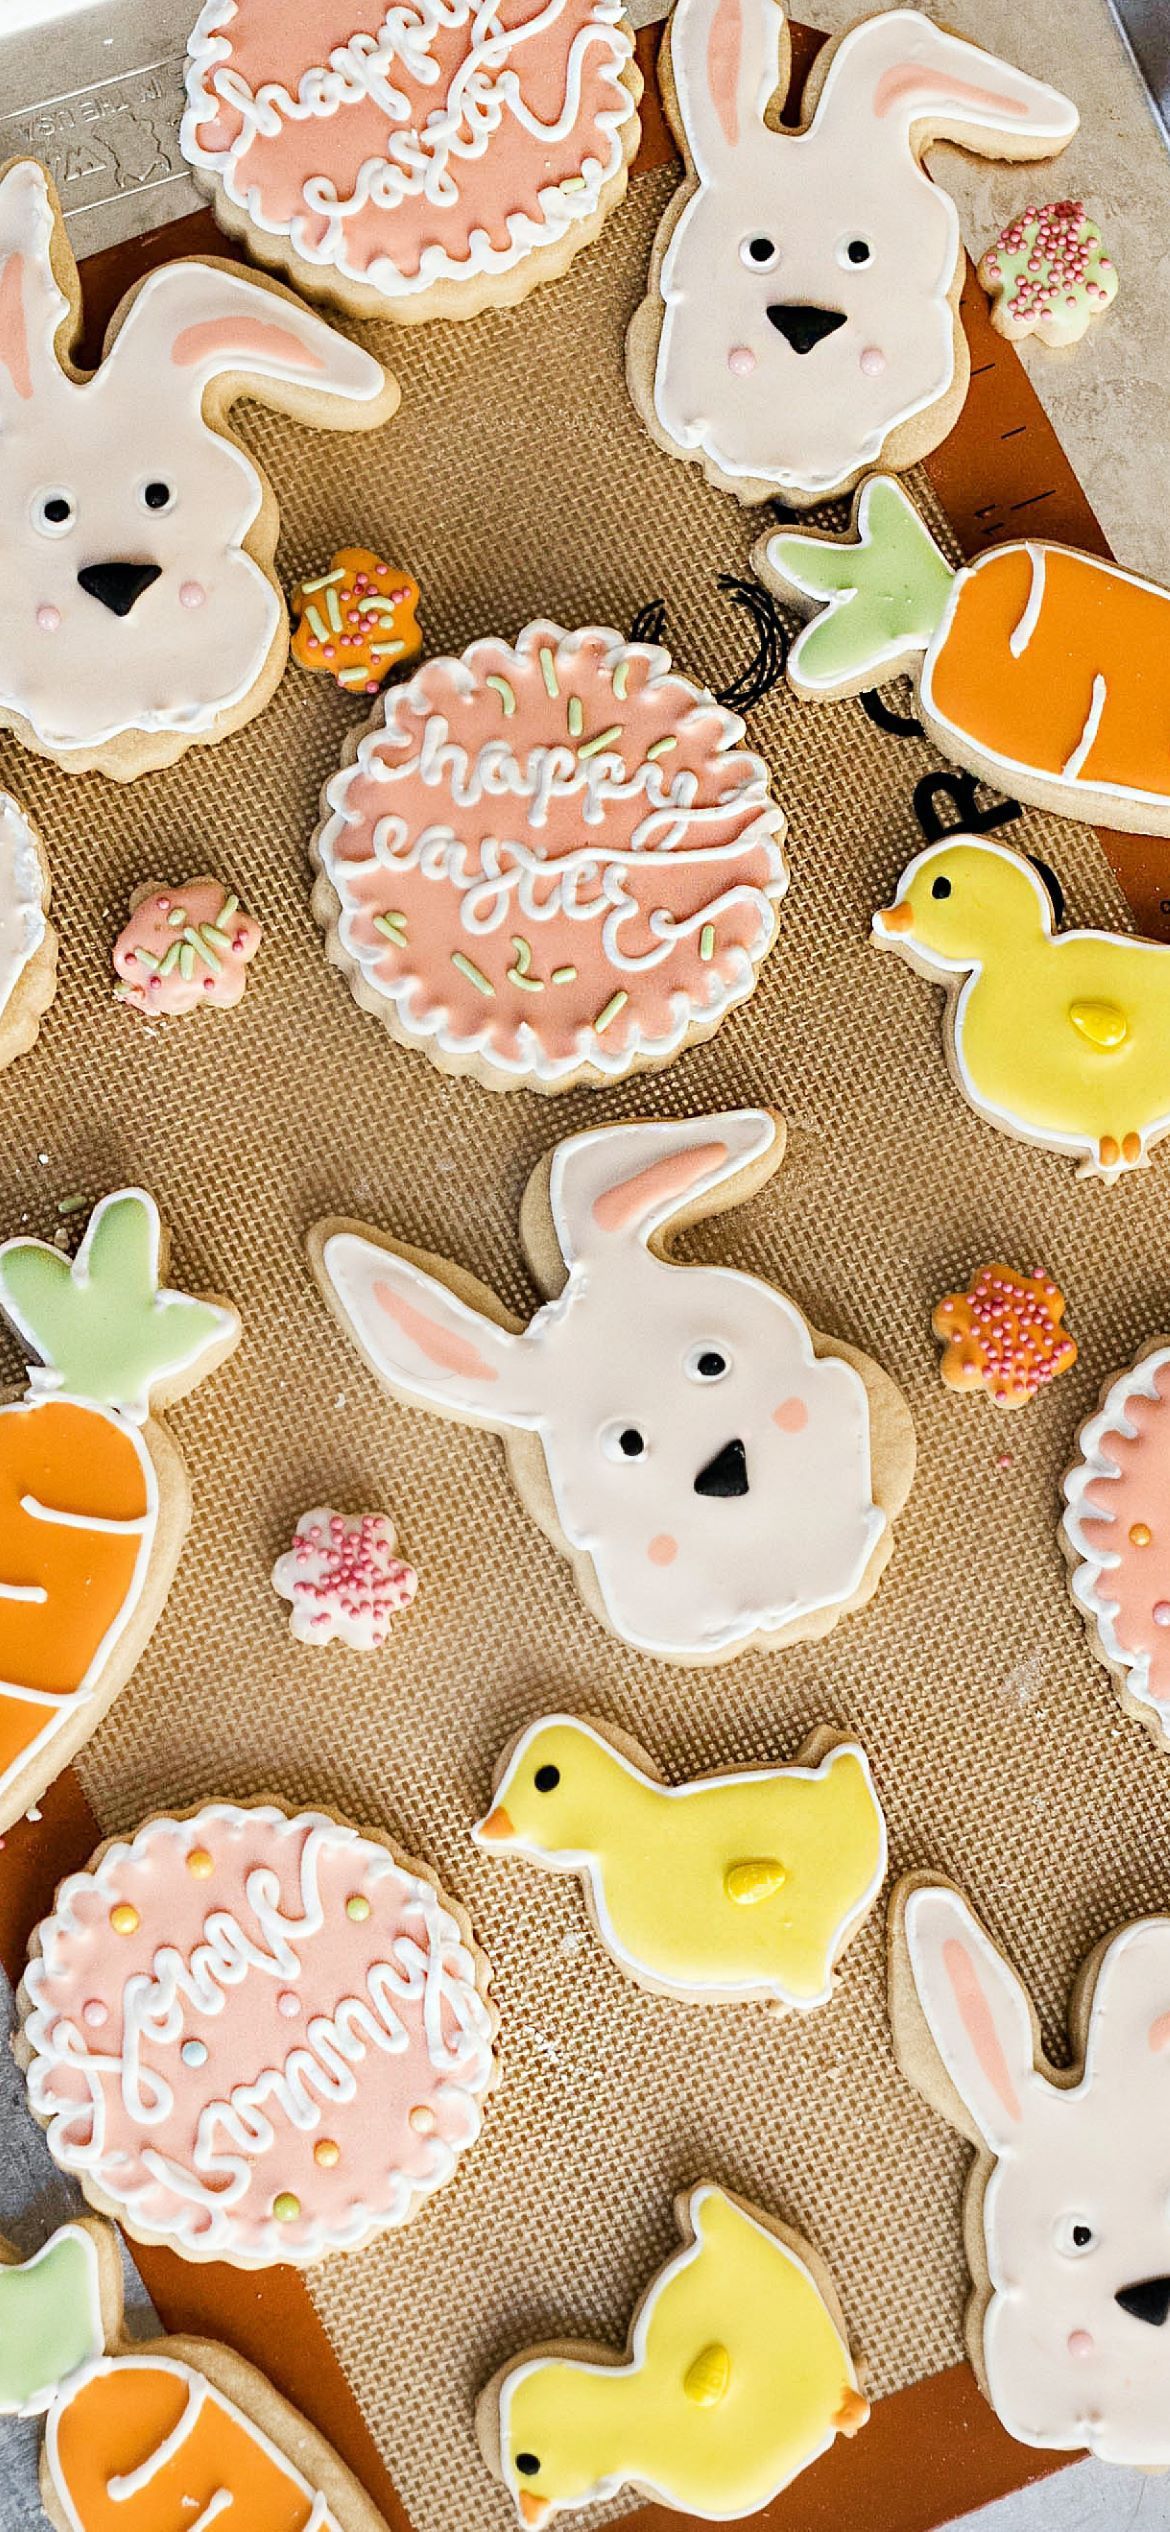 A tray of cookies with bunnies and ducks on it - Easter